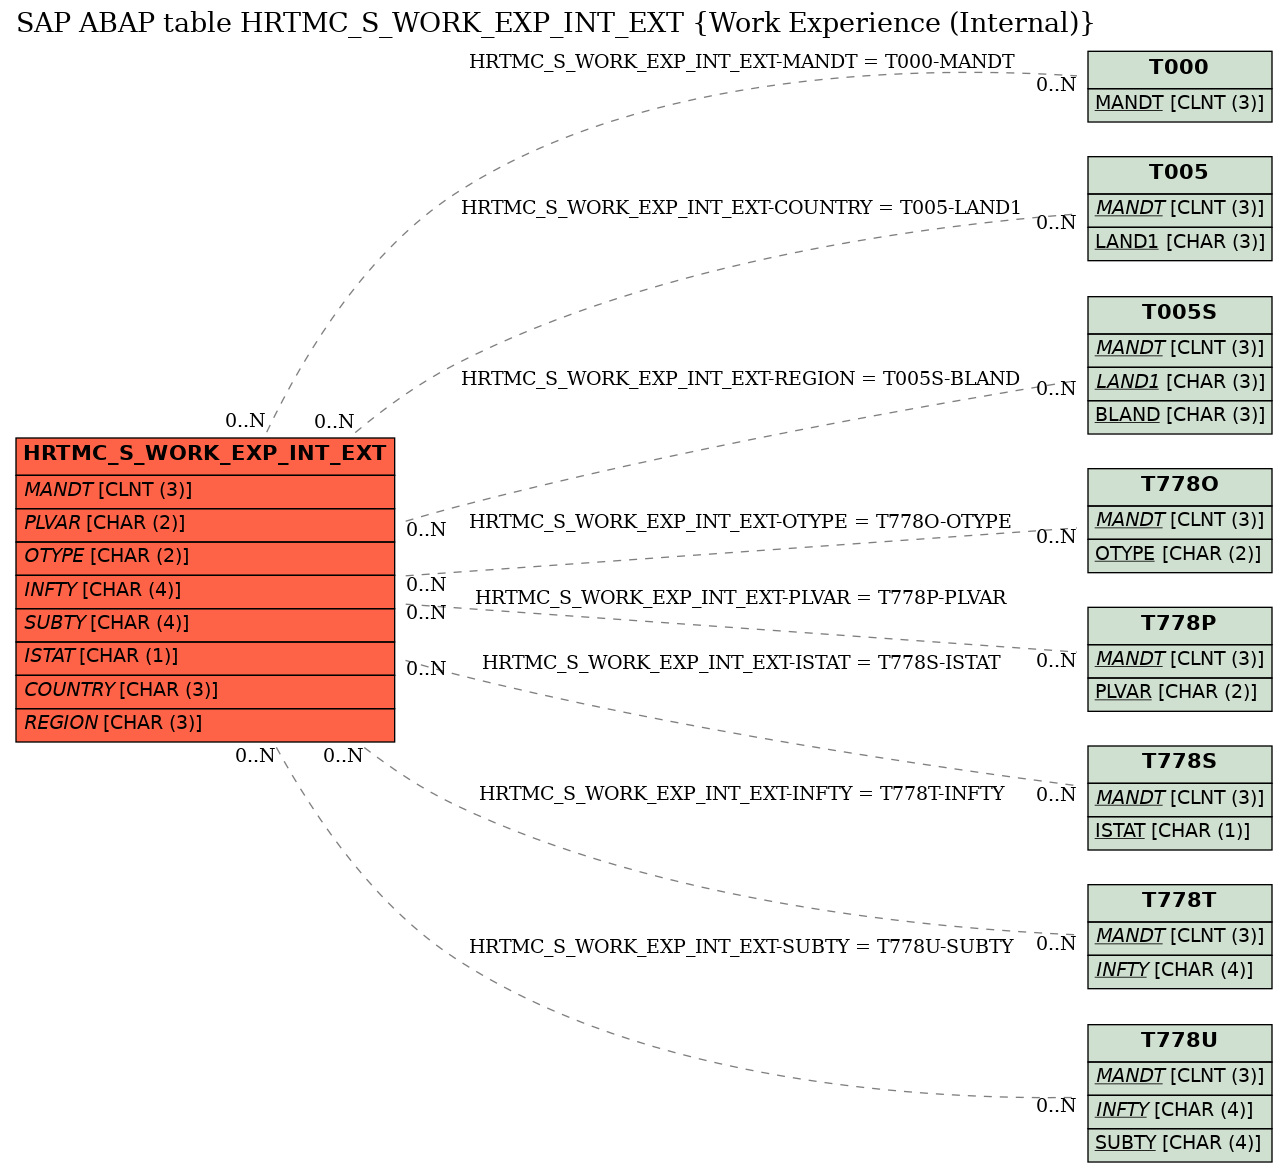 E-R Diagram for table HRTMC_S_WORK_EXP_INT_EXT (Work Experience (Internal))